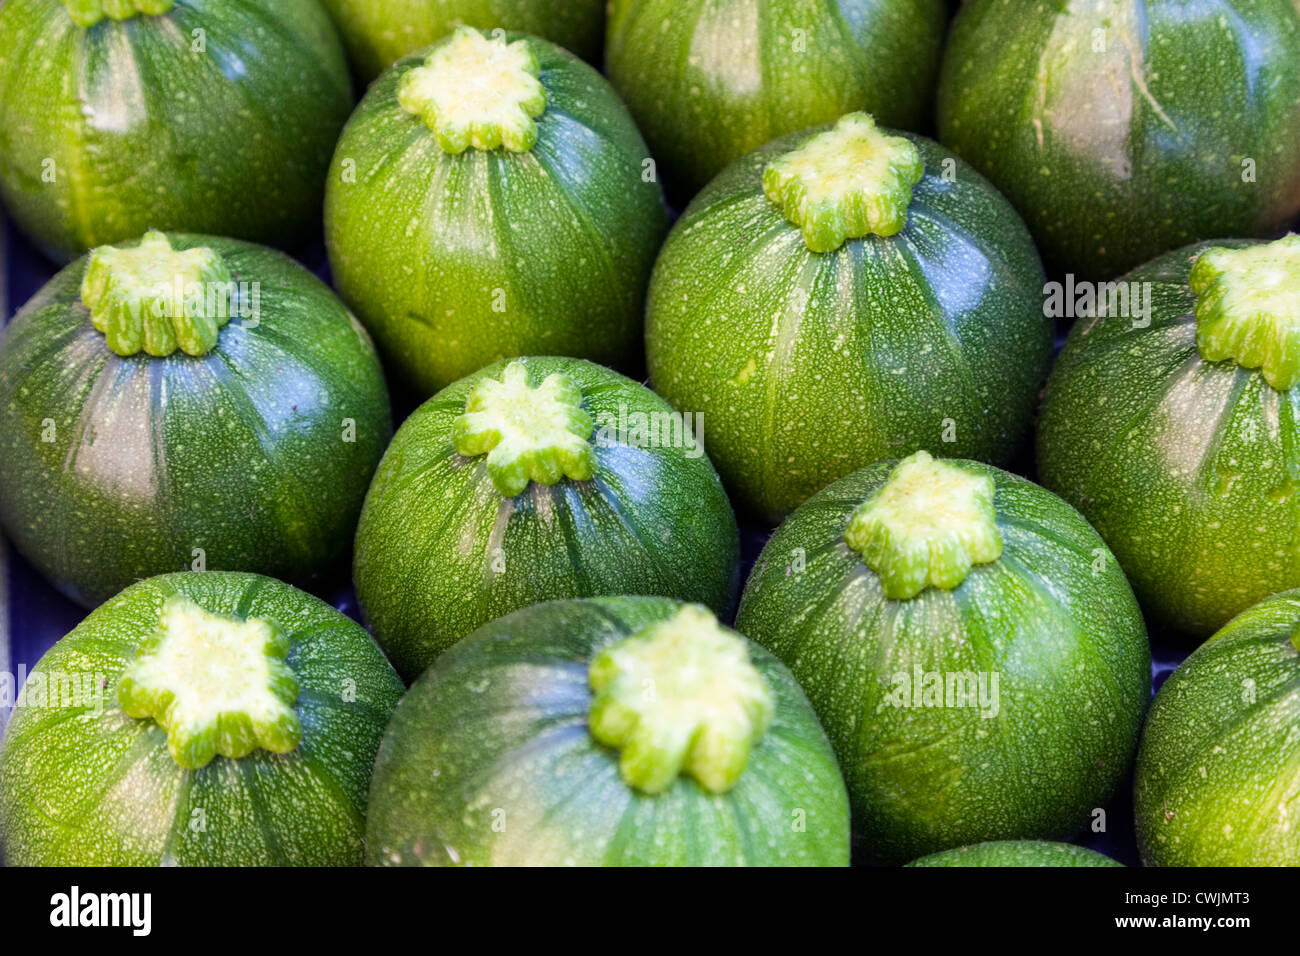 Courgette Courgettes Market High Resolution Stock Photography and Images -  Alamy